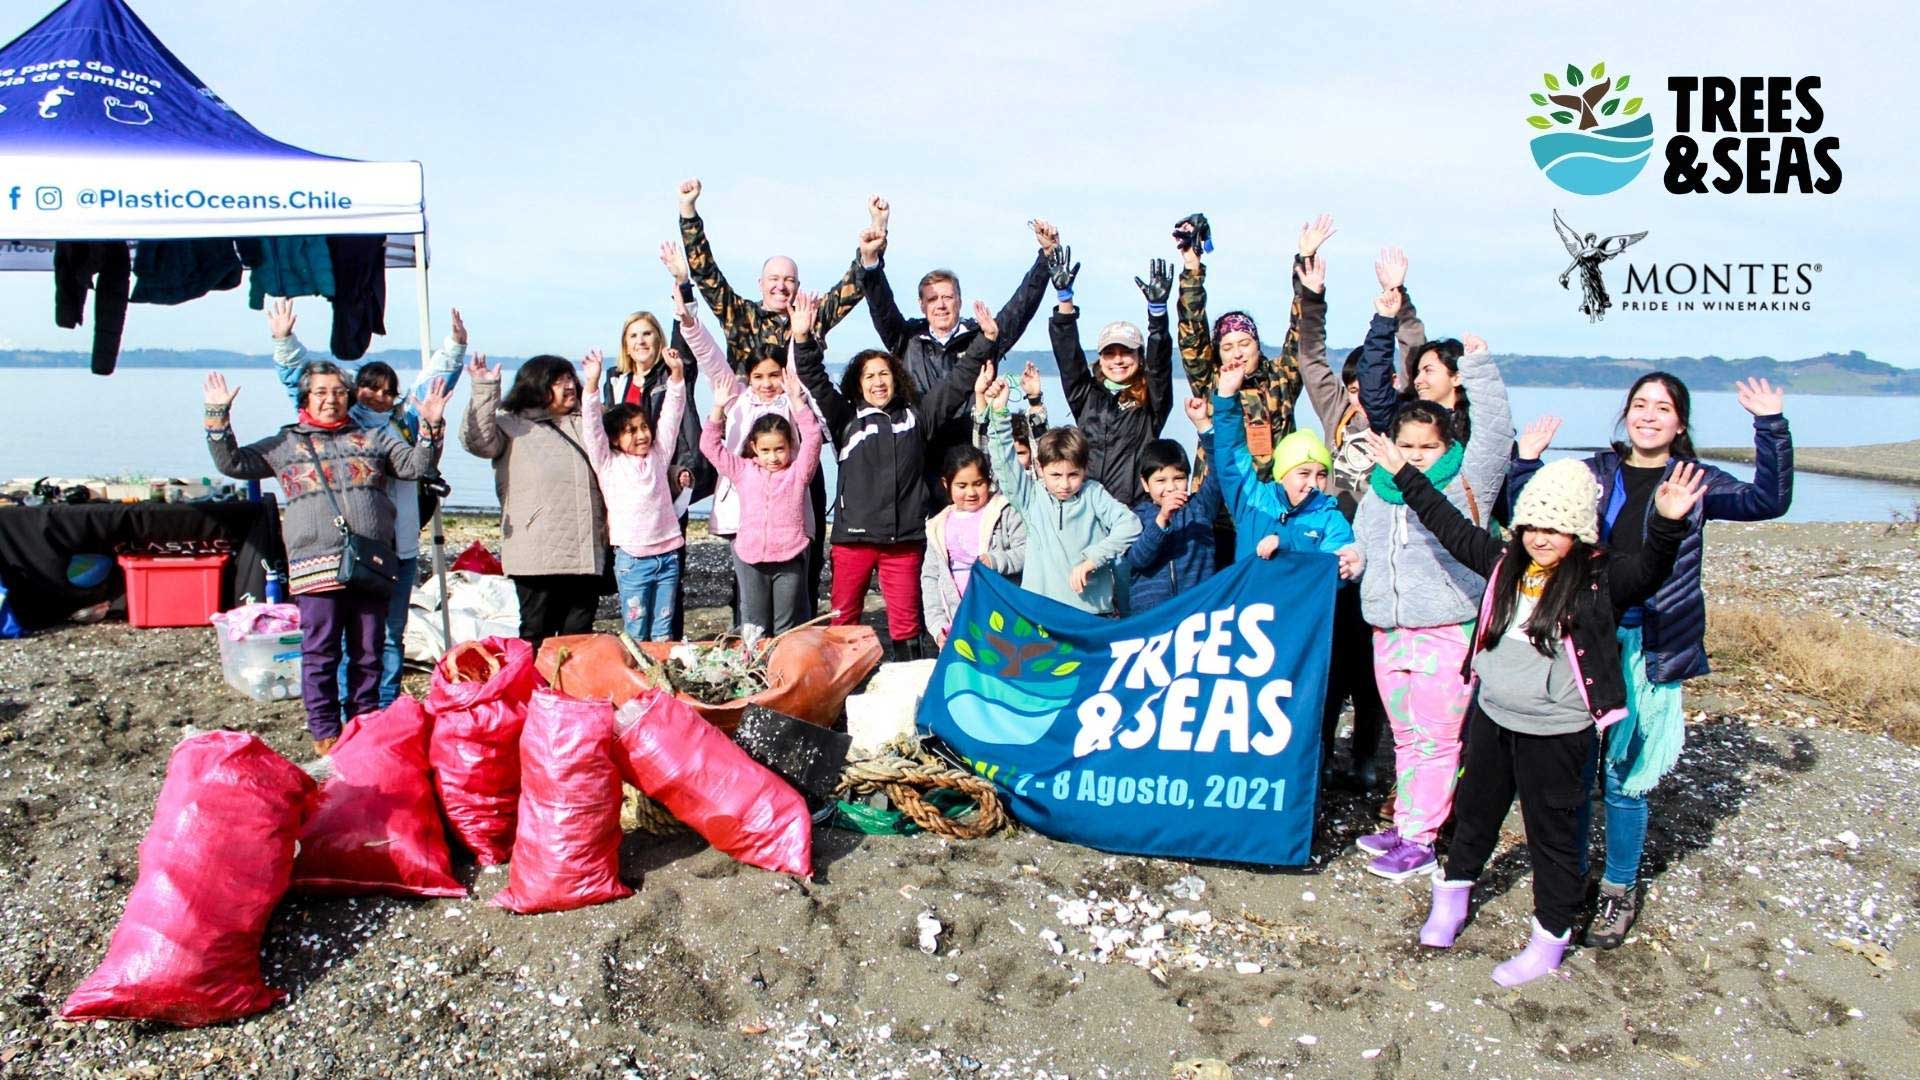 Beach cleanup in Chile for Trees & Seas